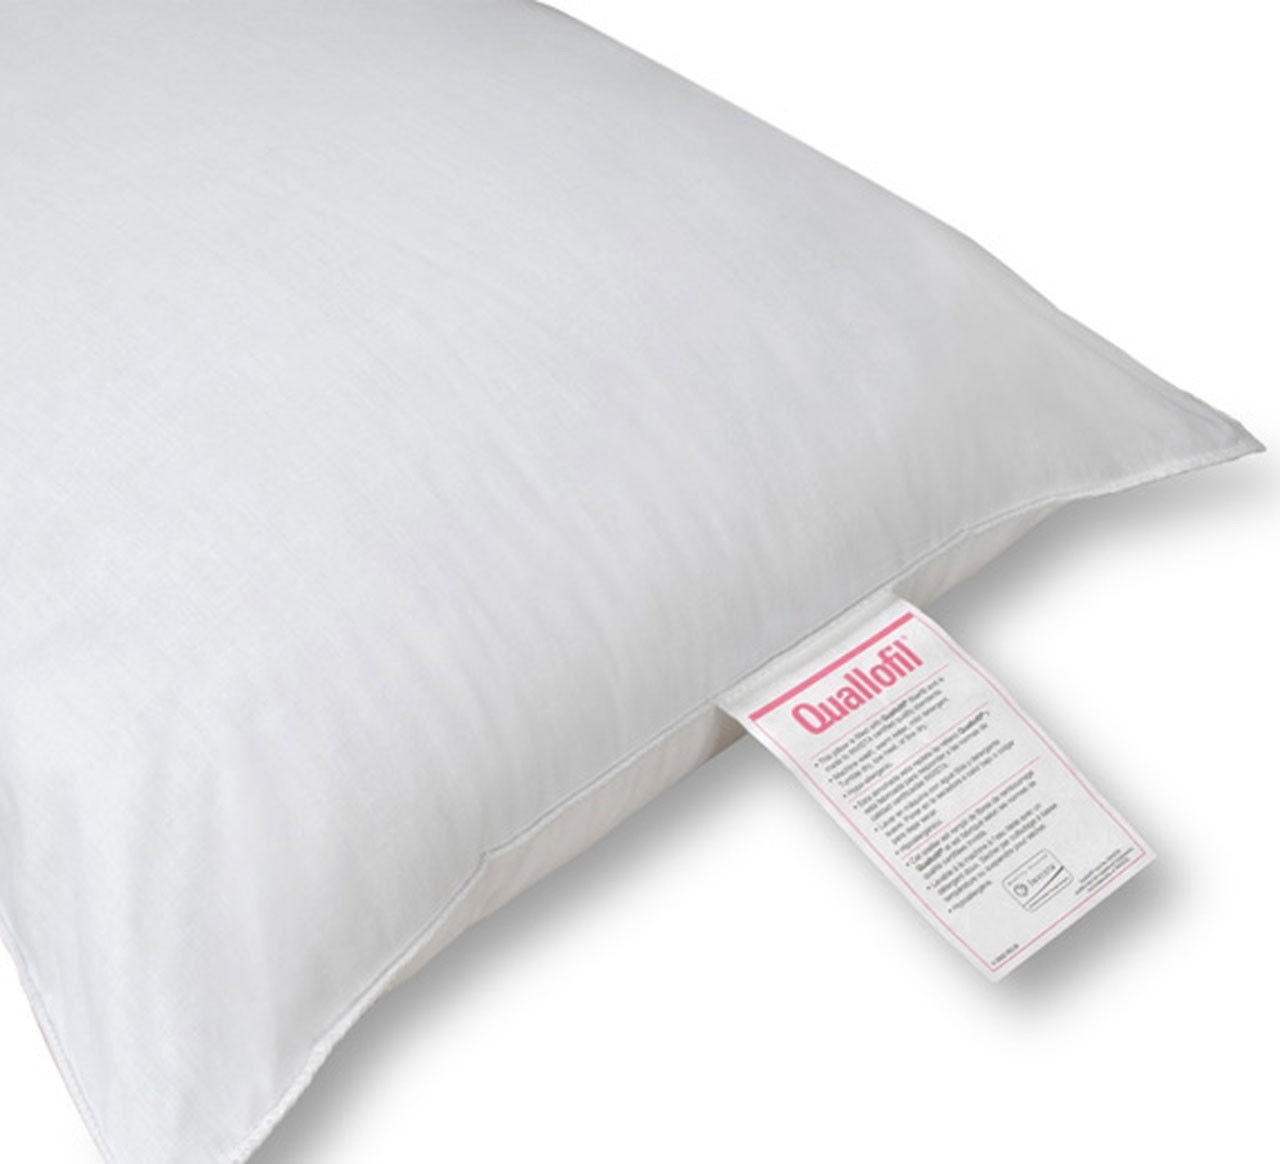 Can you describe the features of the Quallofil pillow, specifically the Qualofil II model?